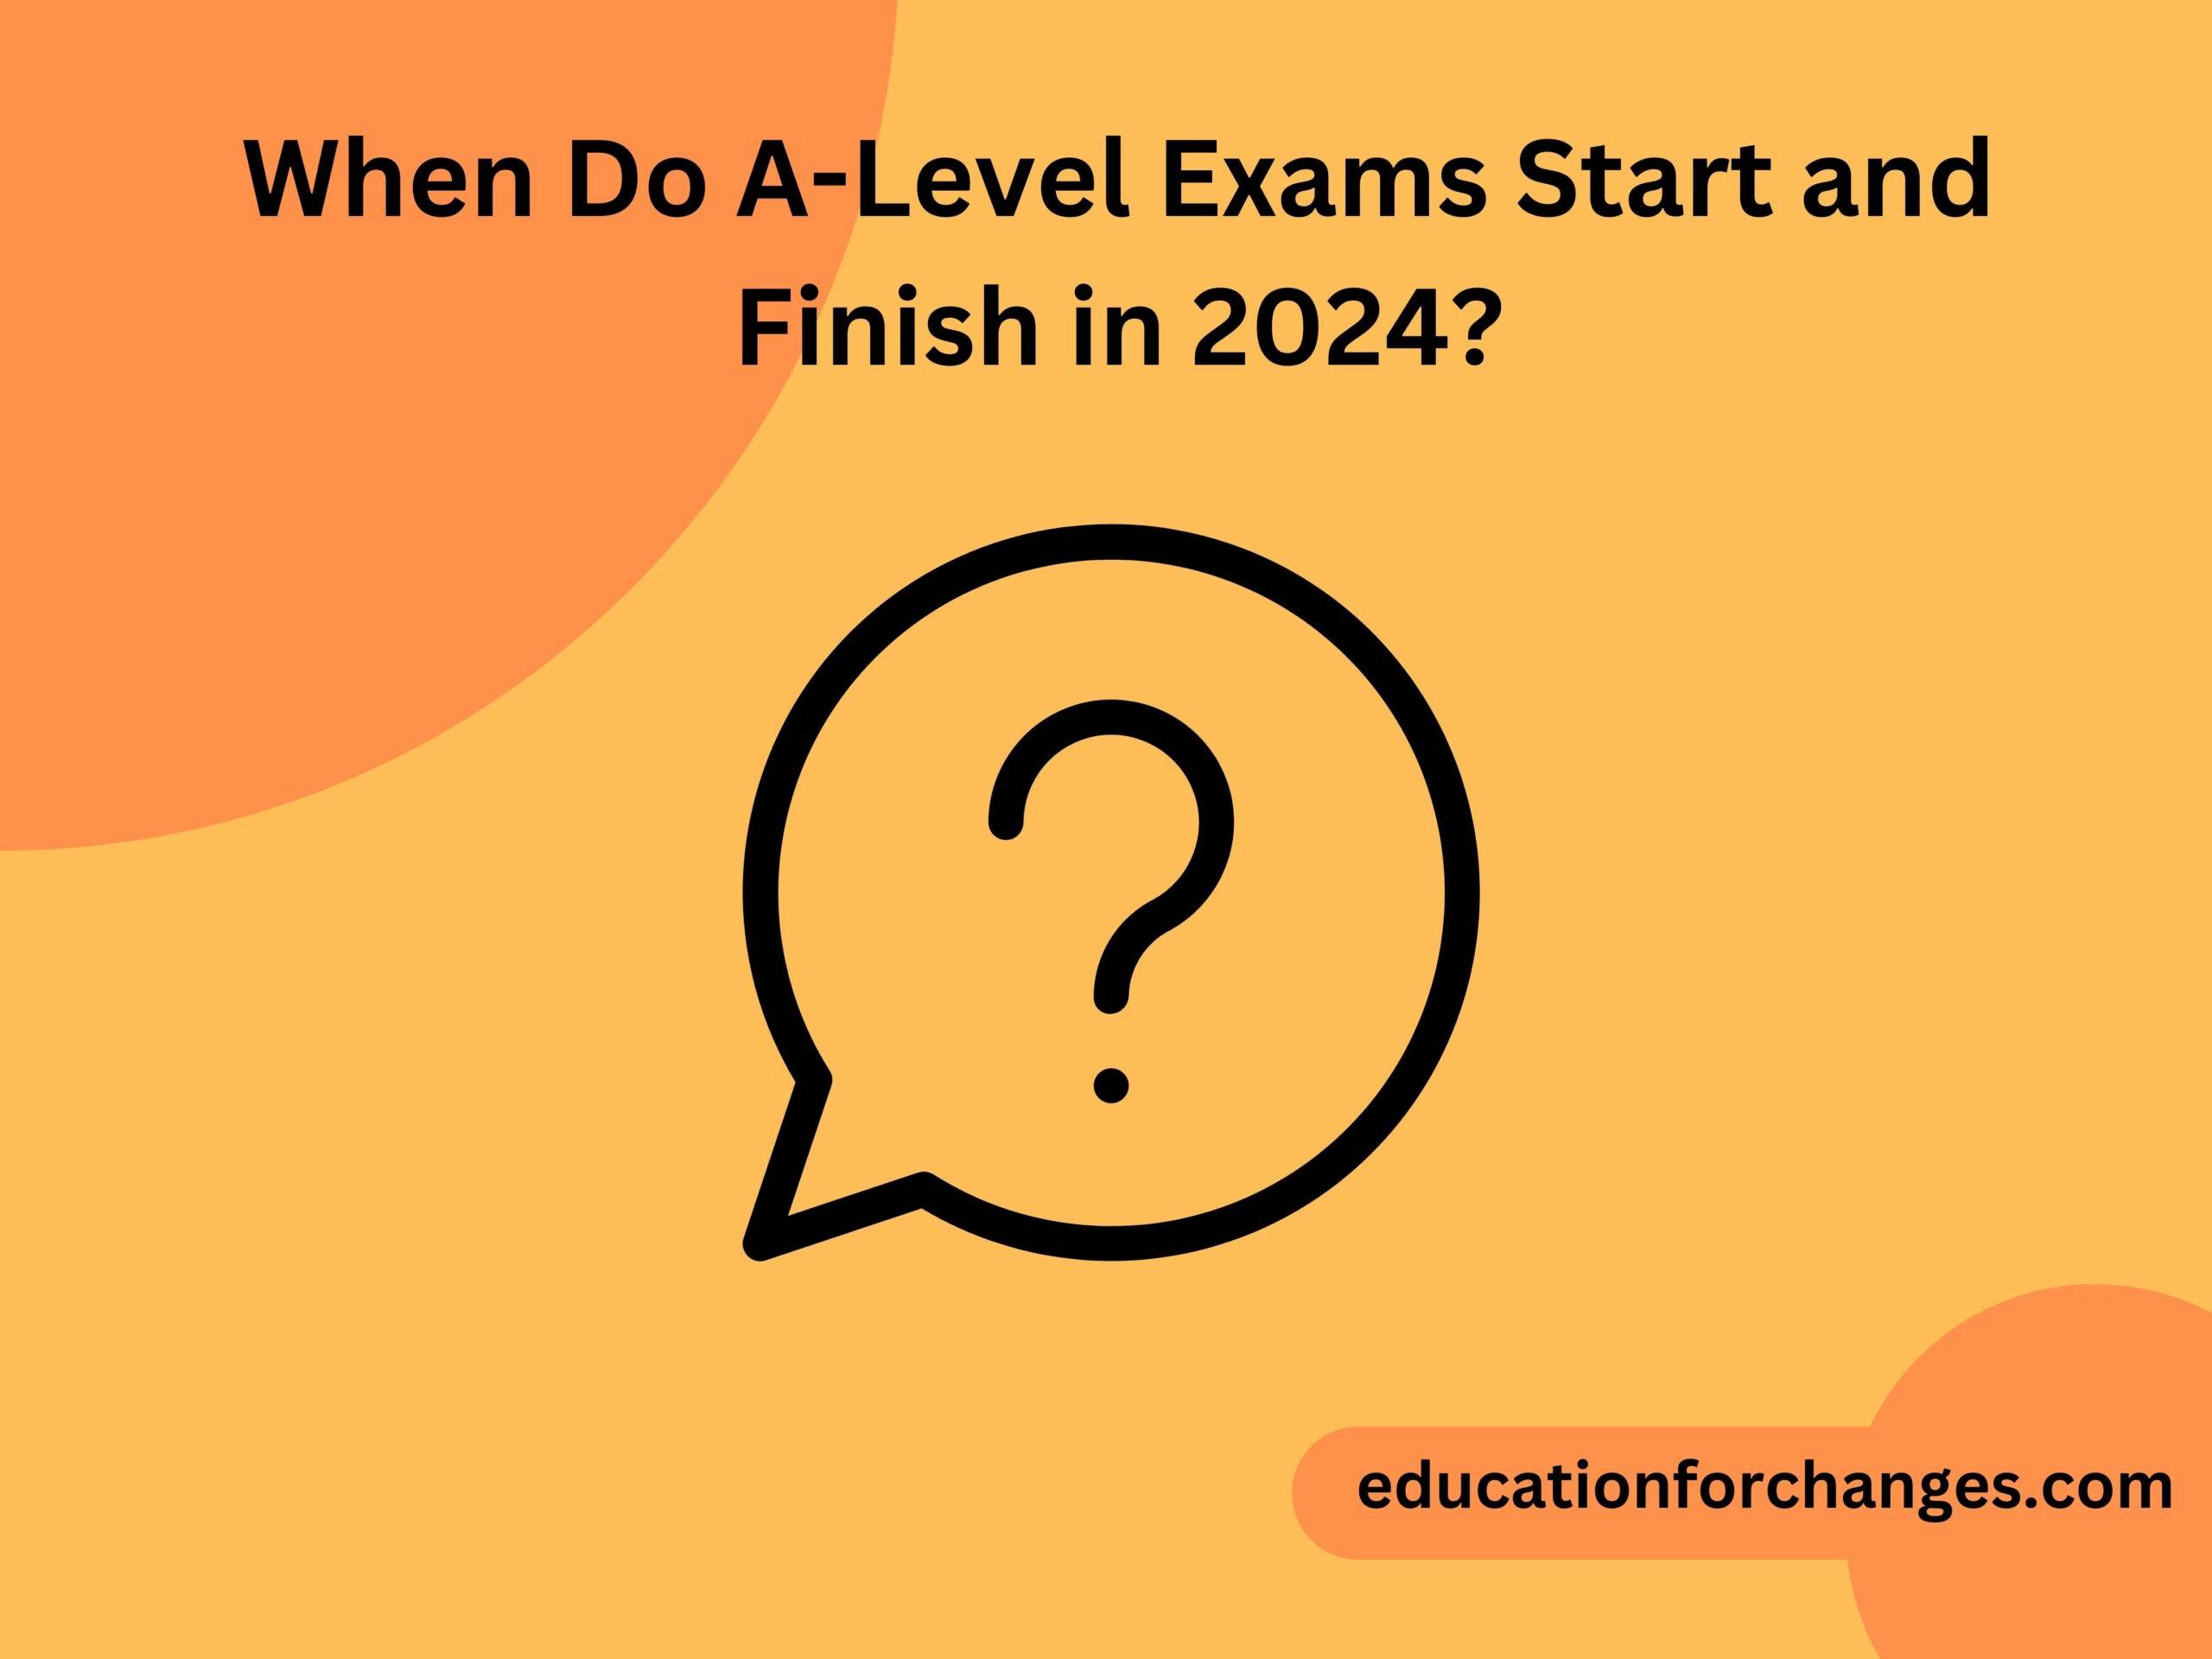 When Do A-Level Exams Start and Finish in 2024?